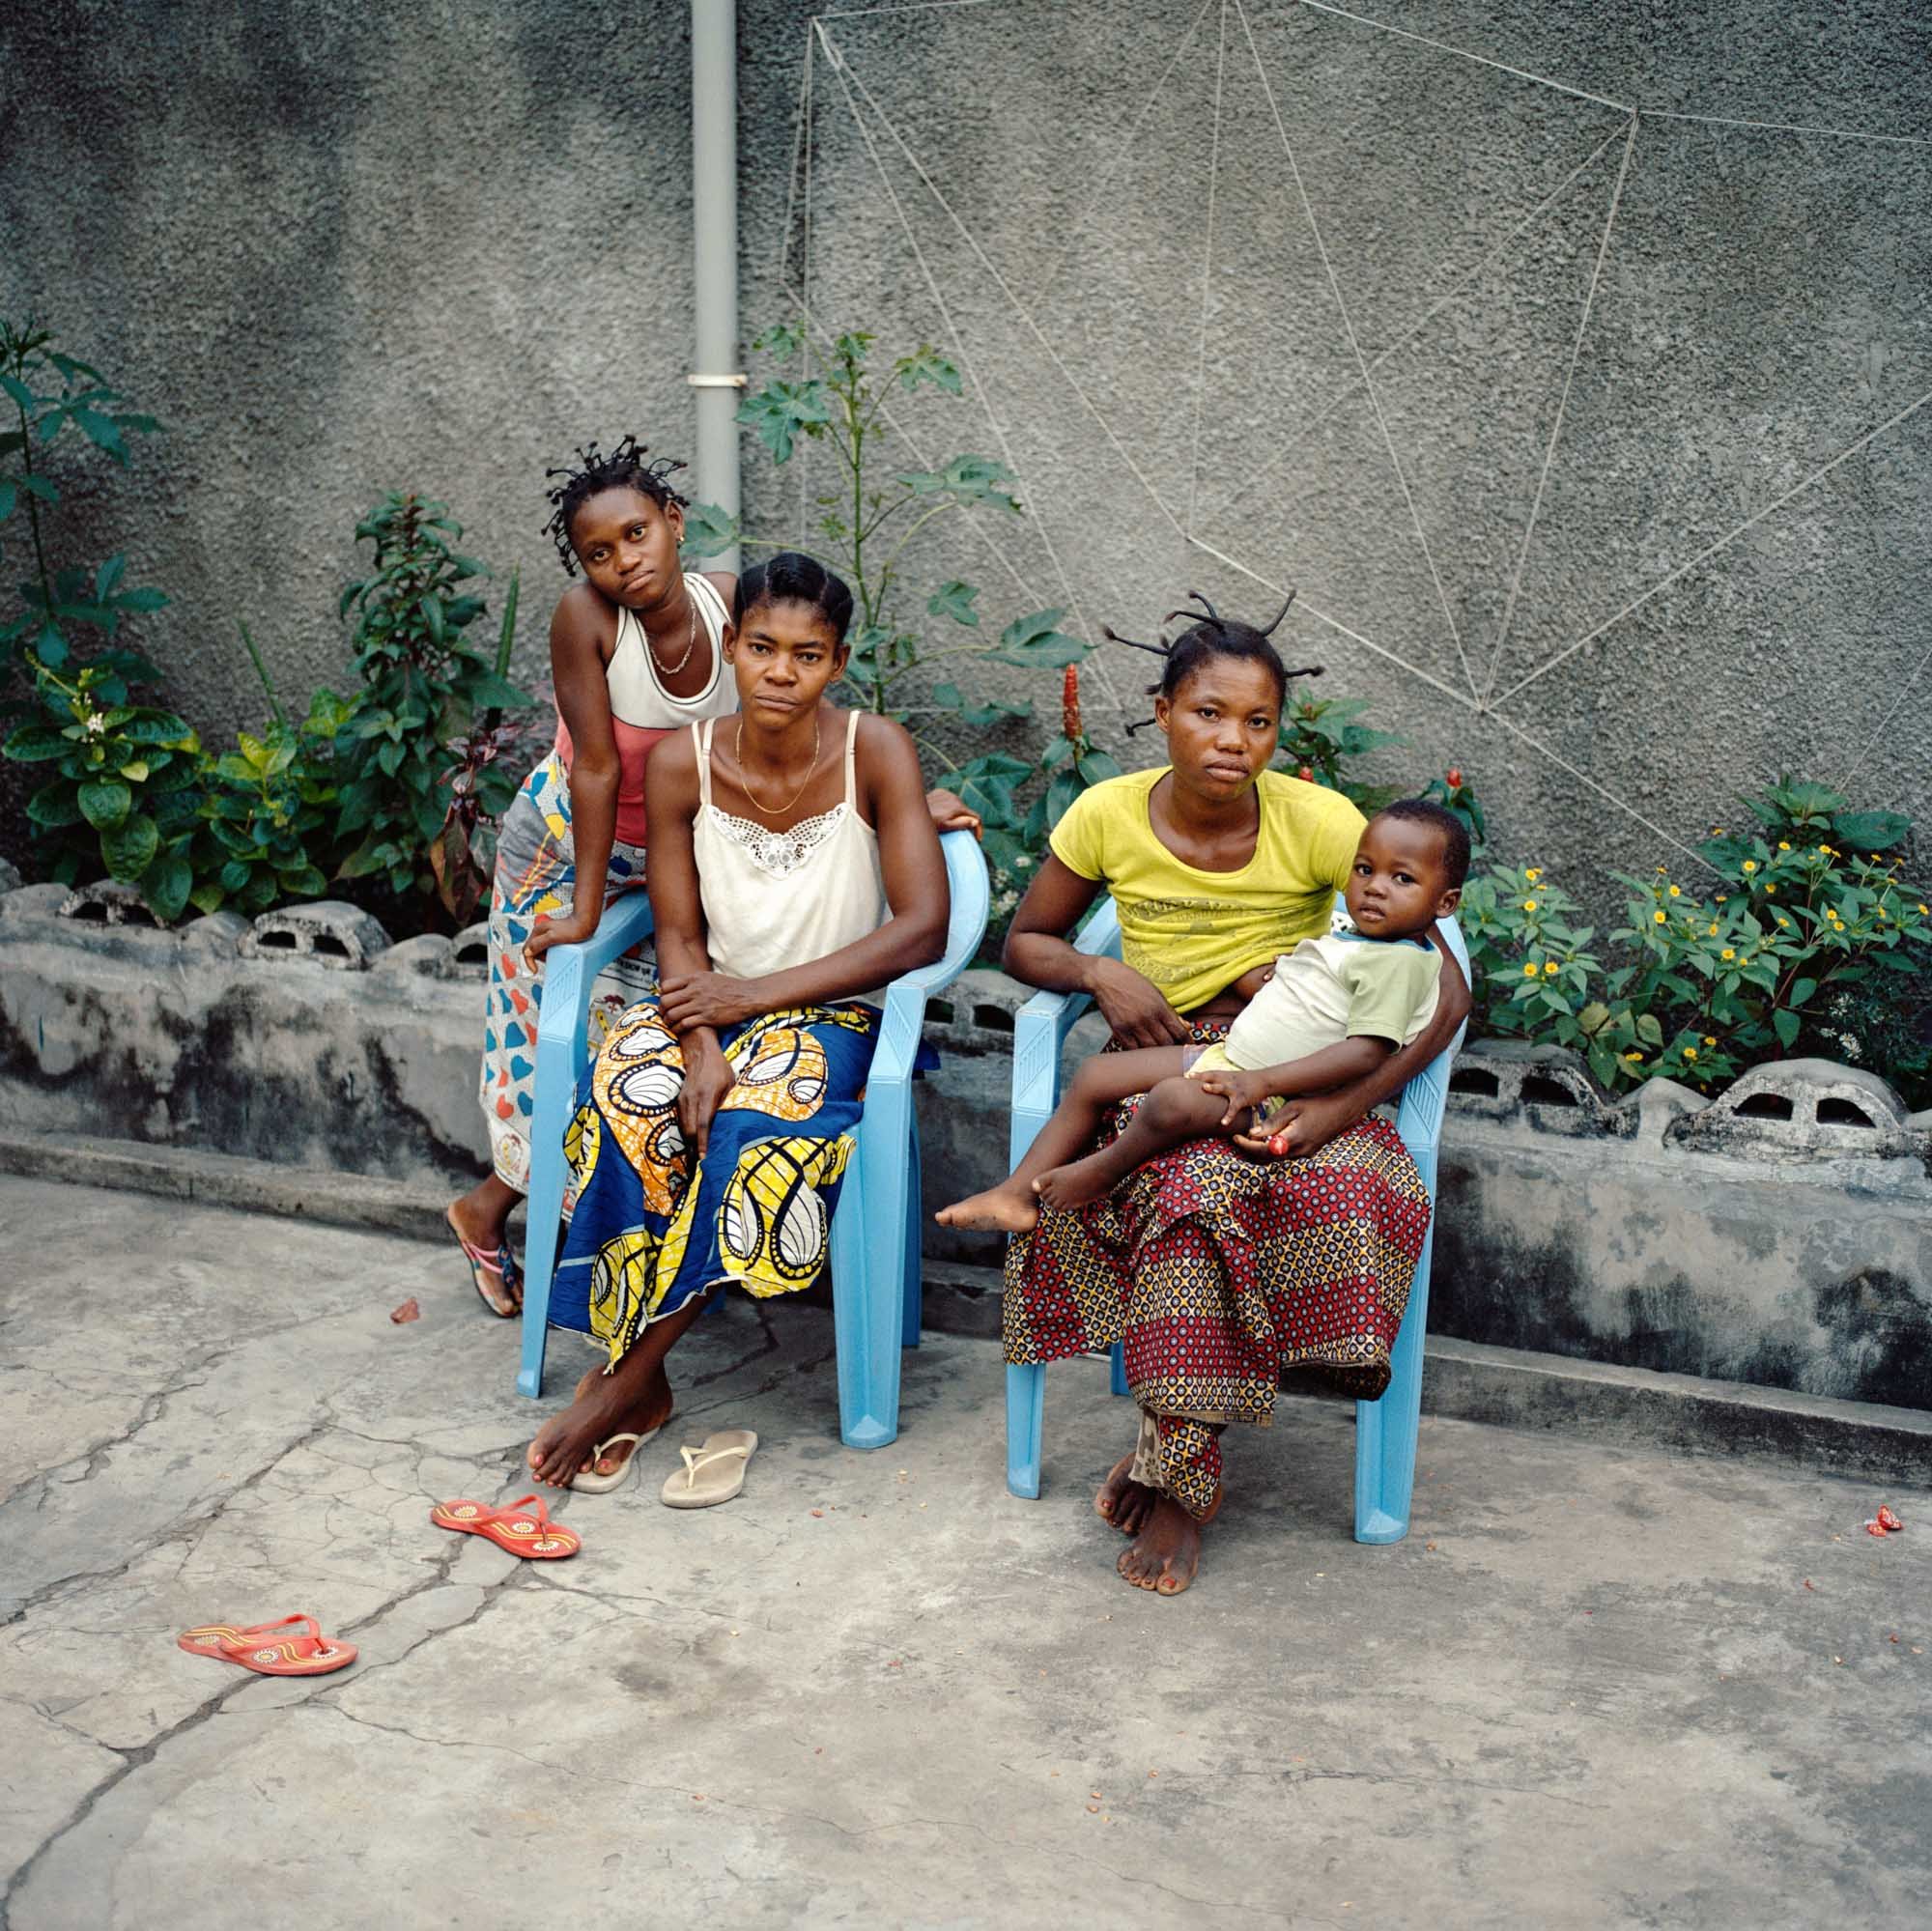 Rosette, Mambuta and Nzusi sit in the courtyard of the House. Enoch does not leave his mother's breast. The time seems long at times, and the dates of intervention are uncertain.